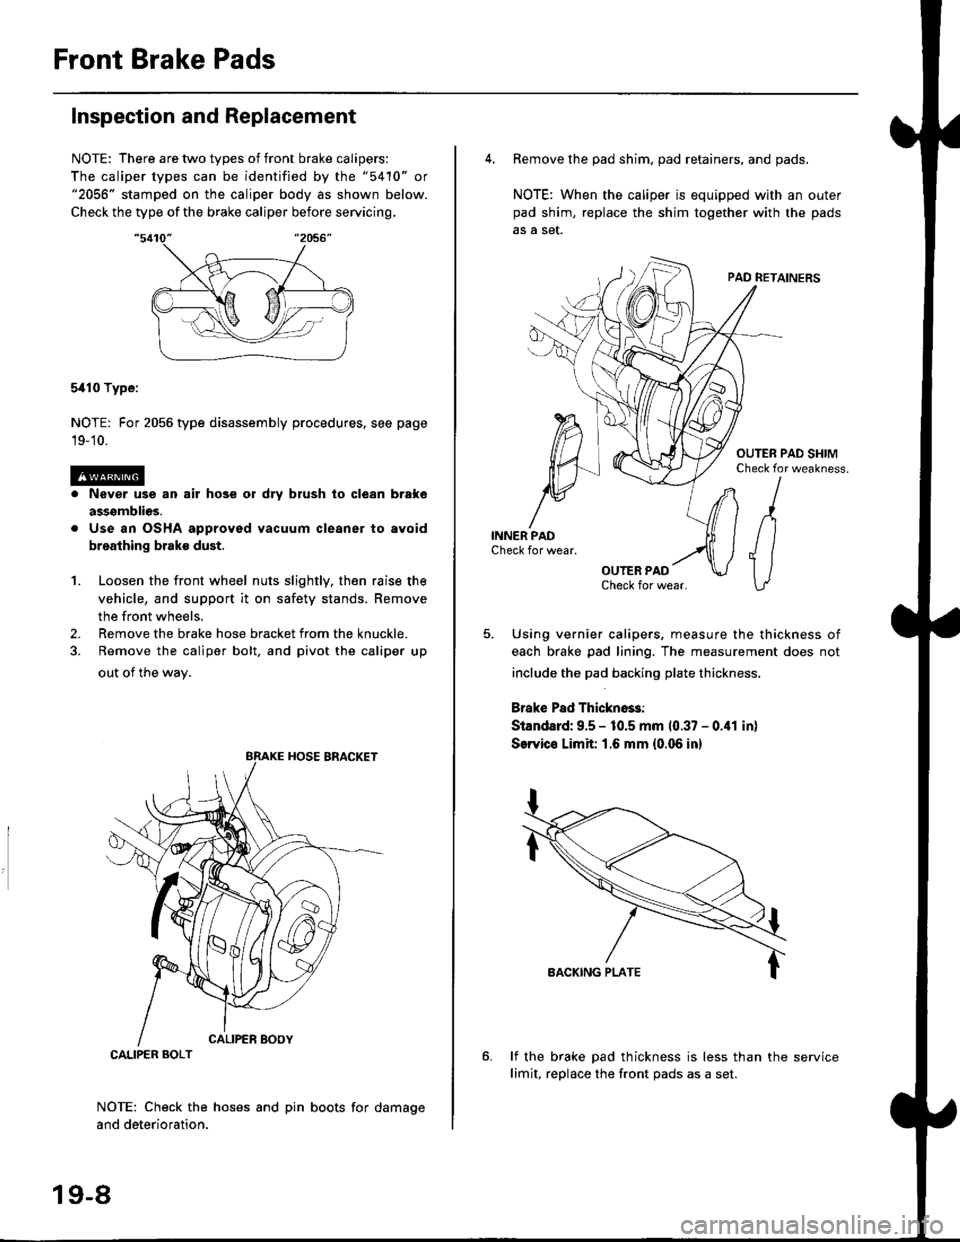 HONDA CIVIC 1997 6.G Workshop Manual Front Brake Pads
Inspection and Replacement
NOTE: There are two types of front brake calipers:
The caliper types can be identified by the "5410" or"2056" stamped on the caliper body as shown below.
Ch